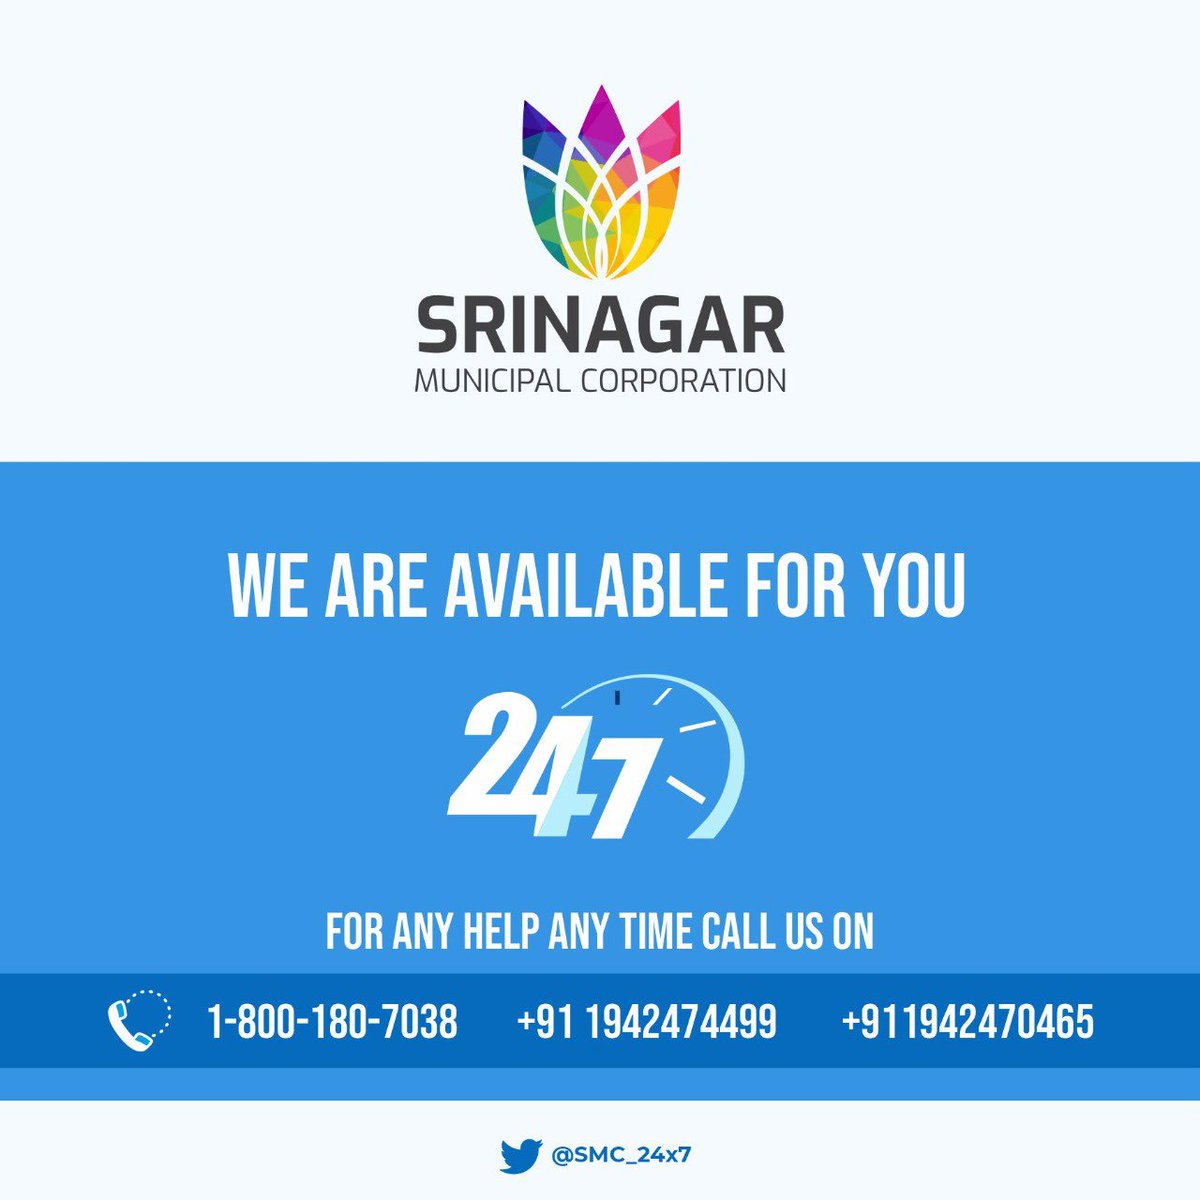 •SMC is with you 24x7• ☎️ Srinagar Municipal Corporation has made its Control Room for grievance redressal fully operational 24x7. For grievances, complaints or any help please reach us ANYTIME on these numbers: +911942474499 1-800-180-7038 (Toll Free) +911942470465 @SMC_24x7